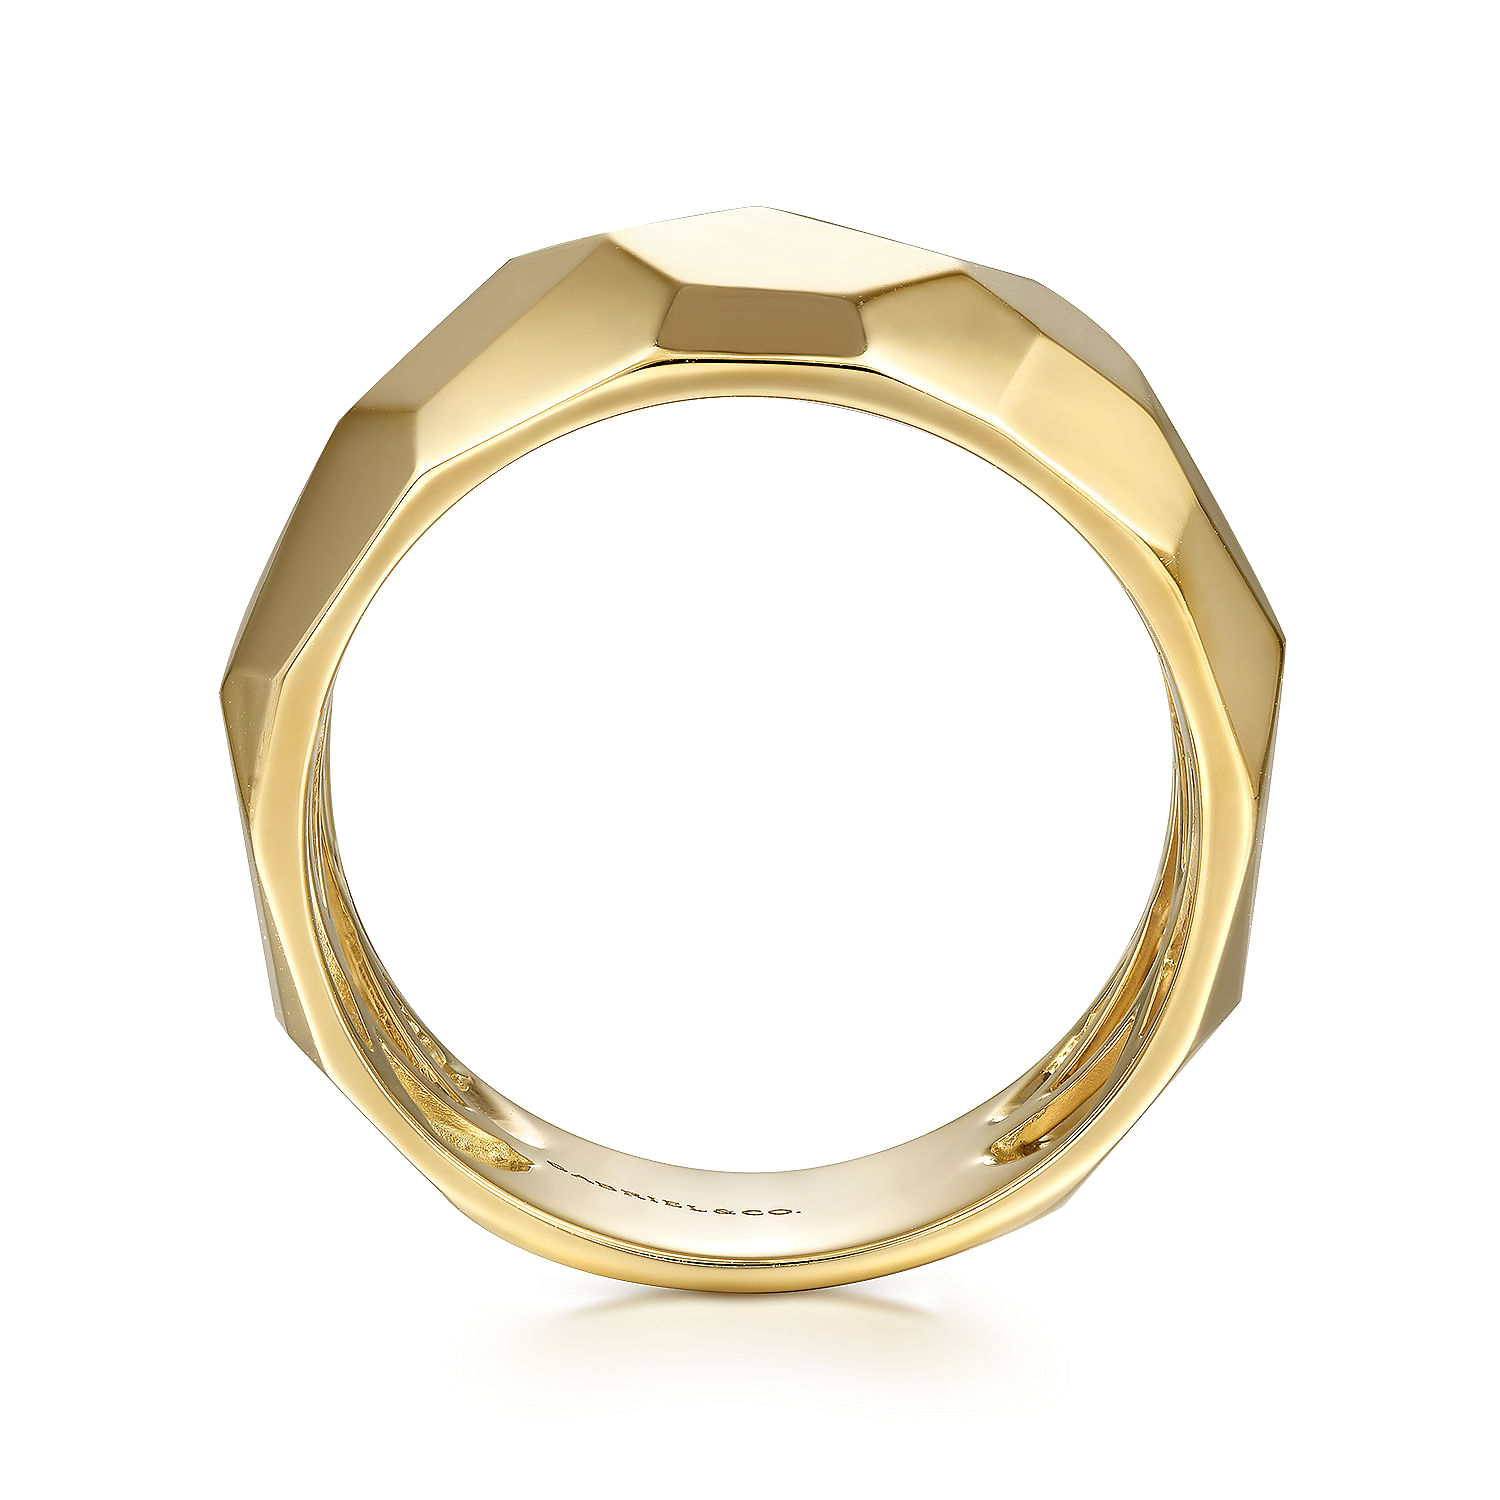 Wide 14K Yellow Gold Hammered Ring